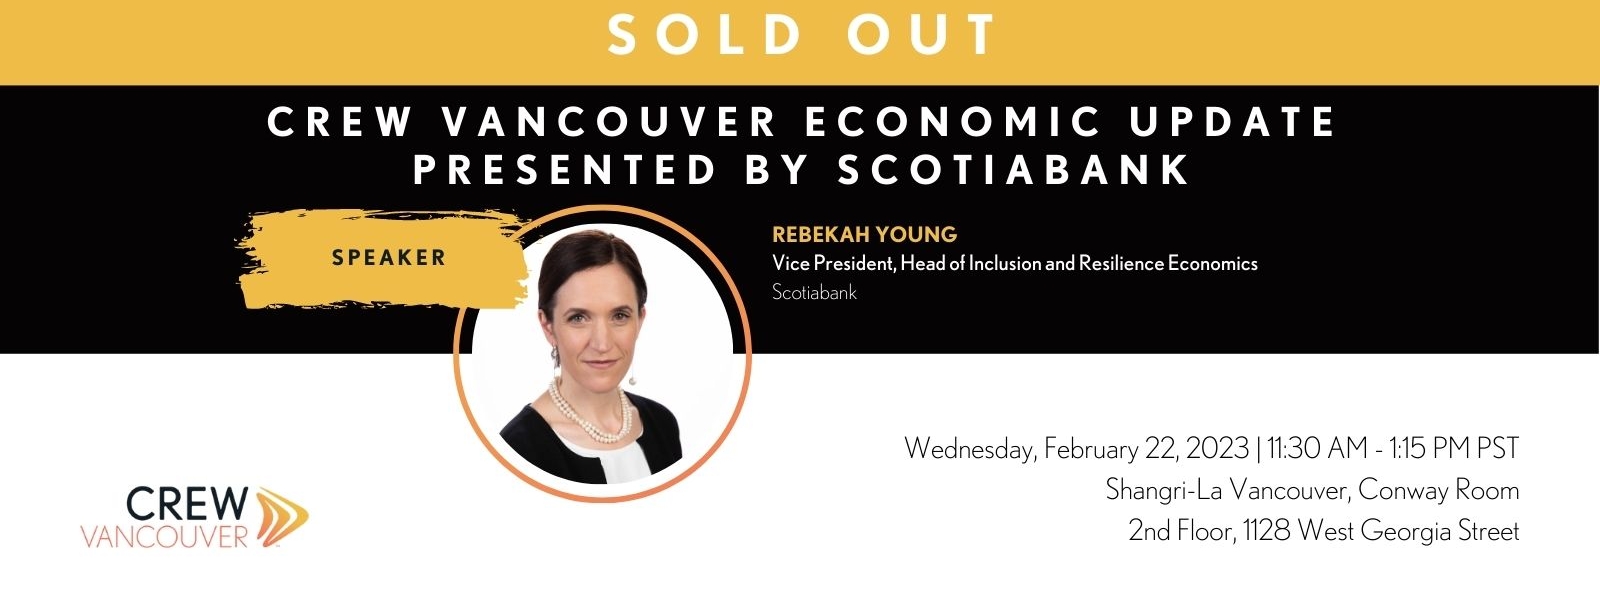 CREW Vancouver Event Economic Update Sold Out Ribbon 2023 02 22 W